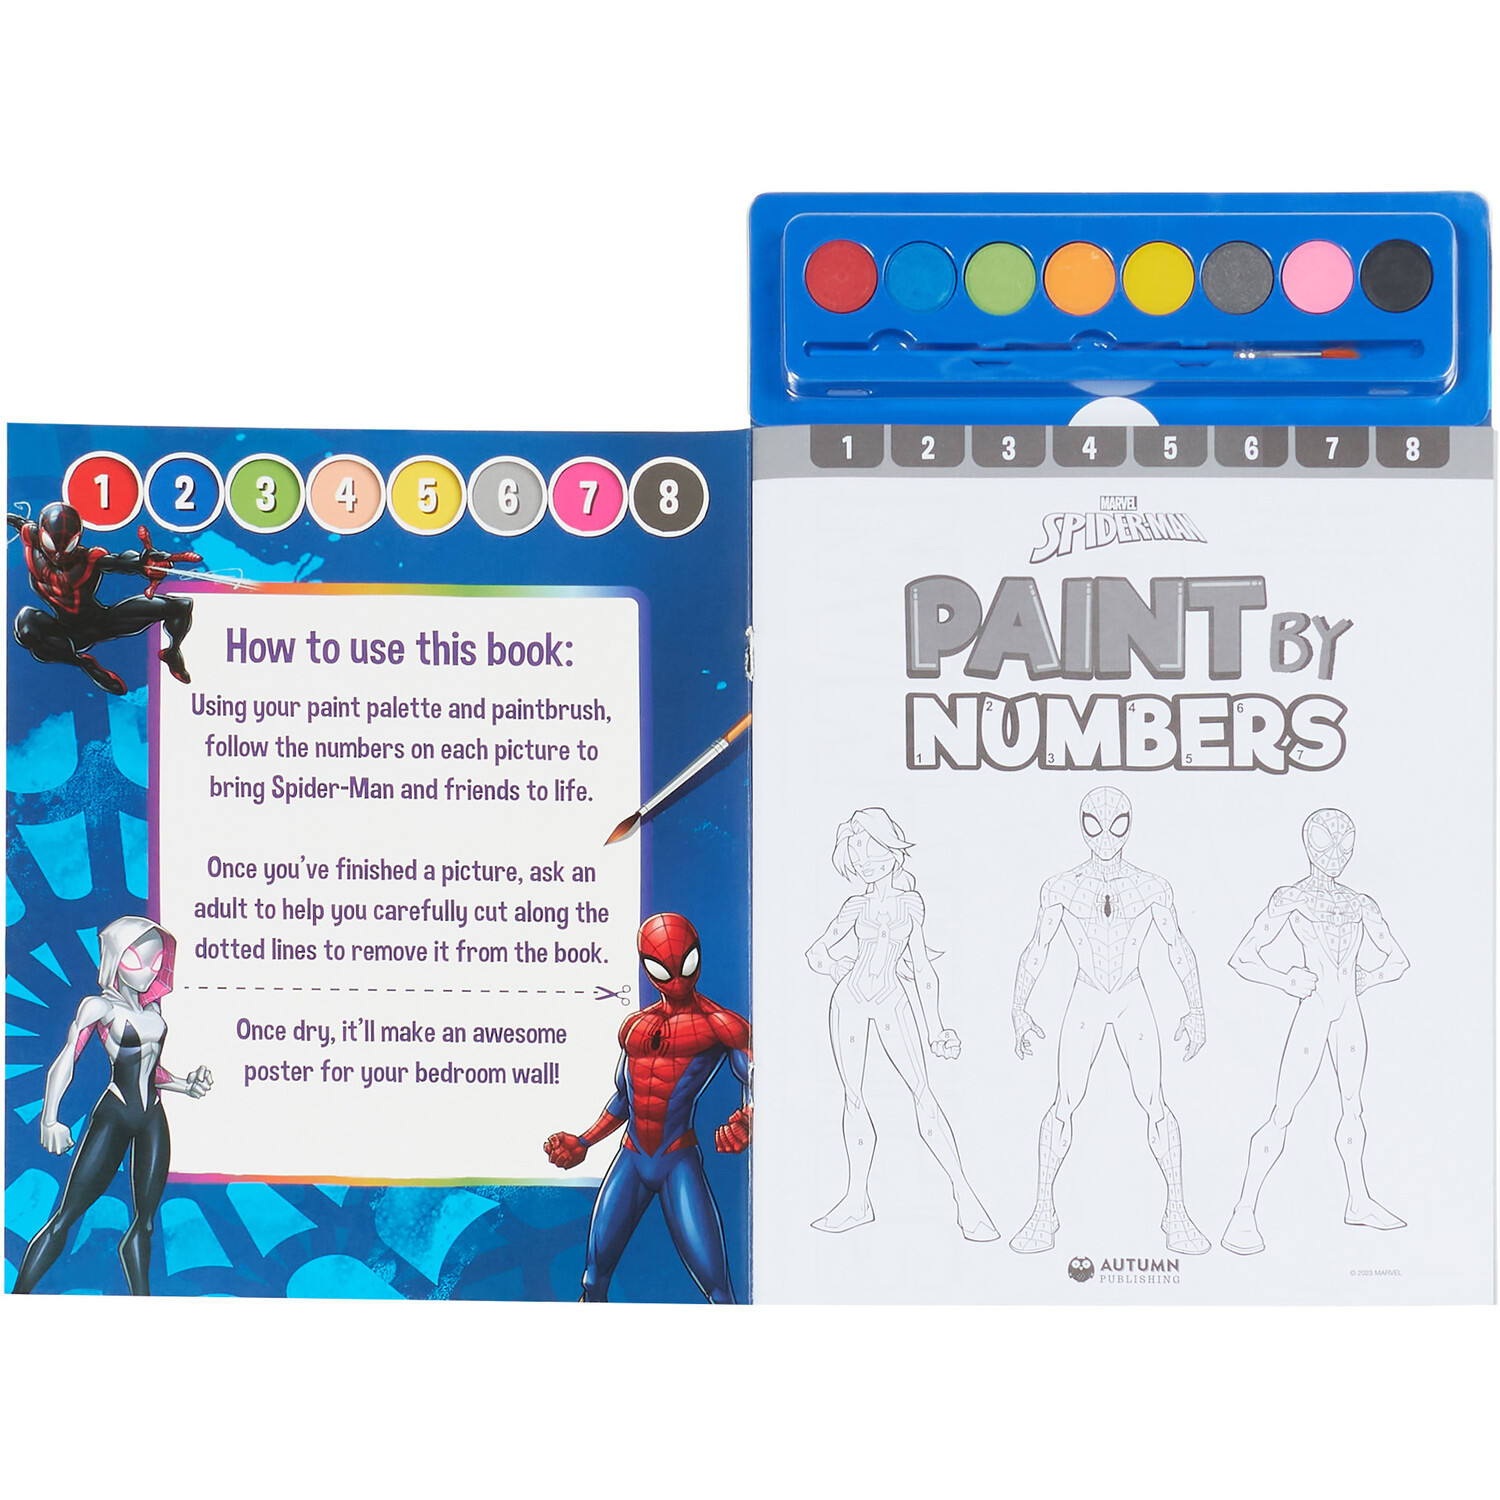 Paint by Numbers Book Image 4